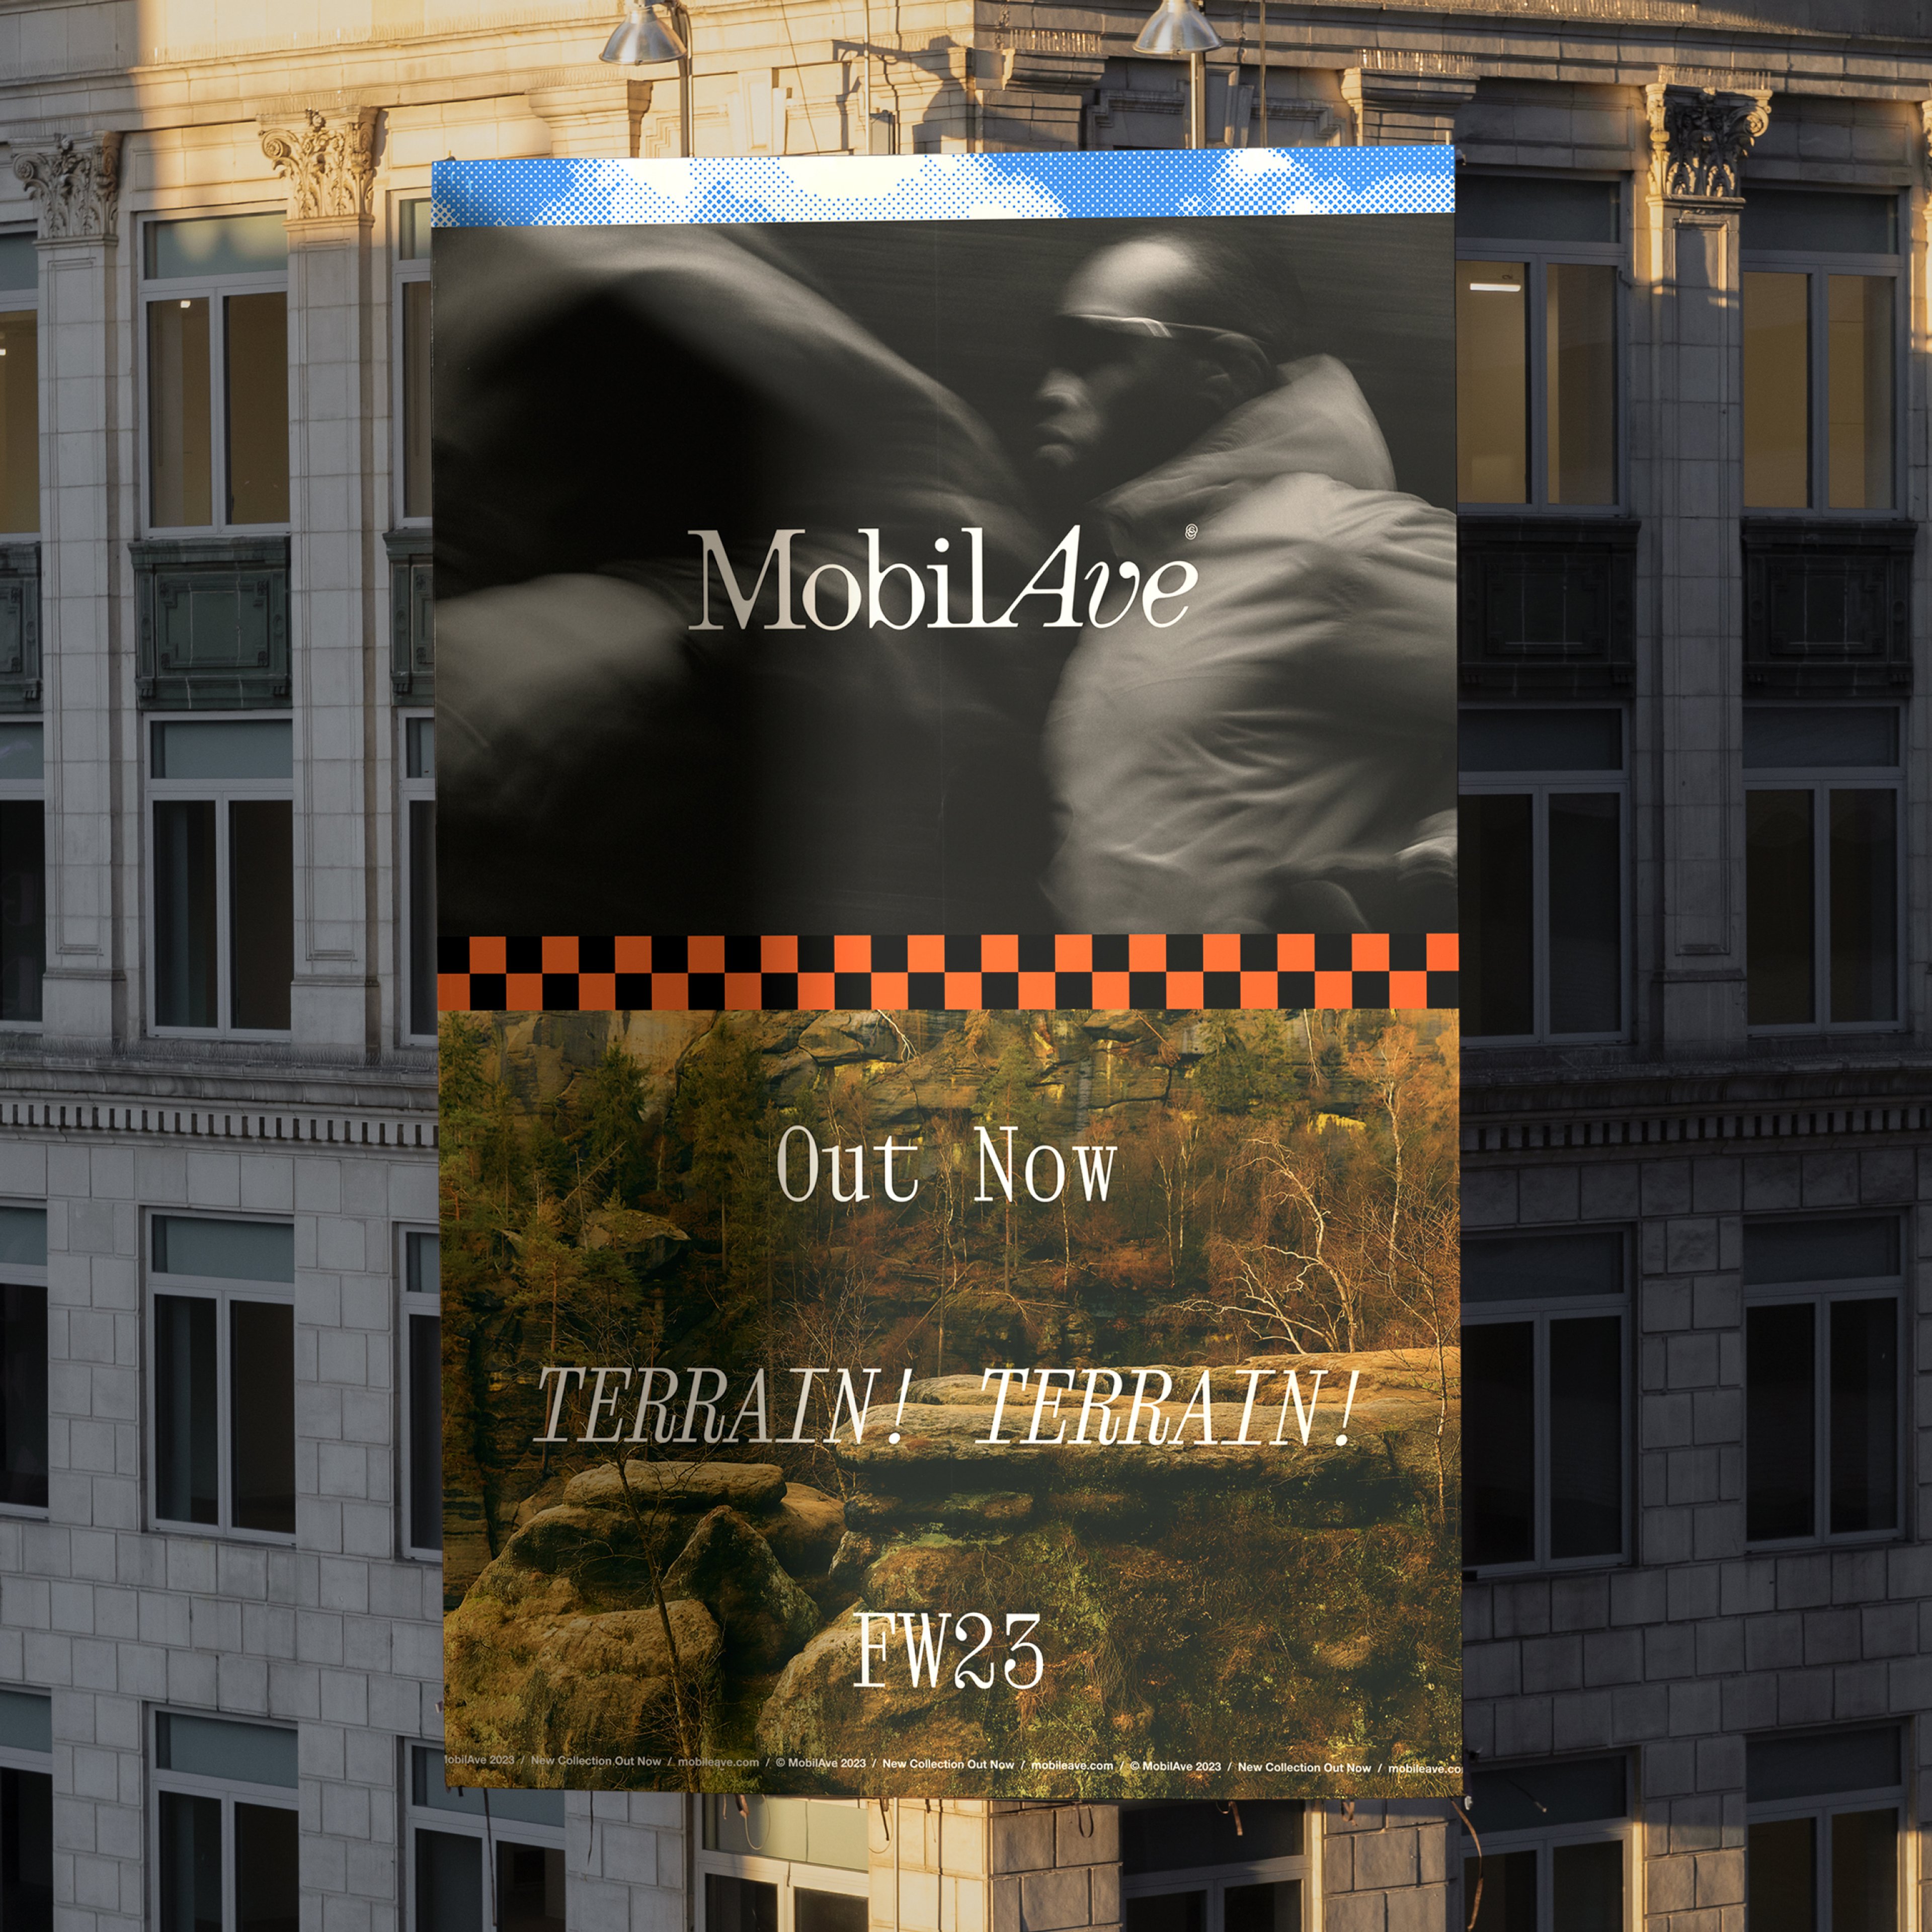 A billboard advertisement in New York City for the new Mobile Ave Fall Winter 2023 collection